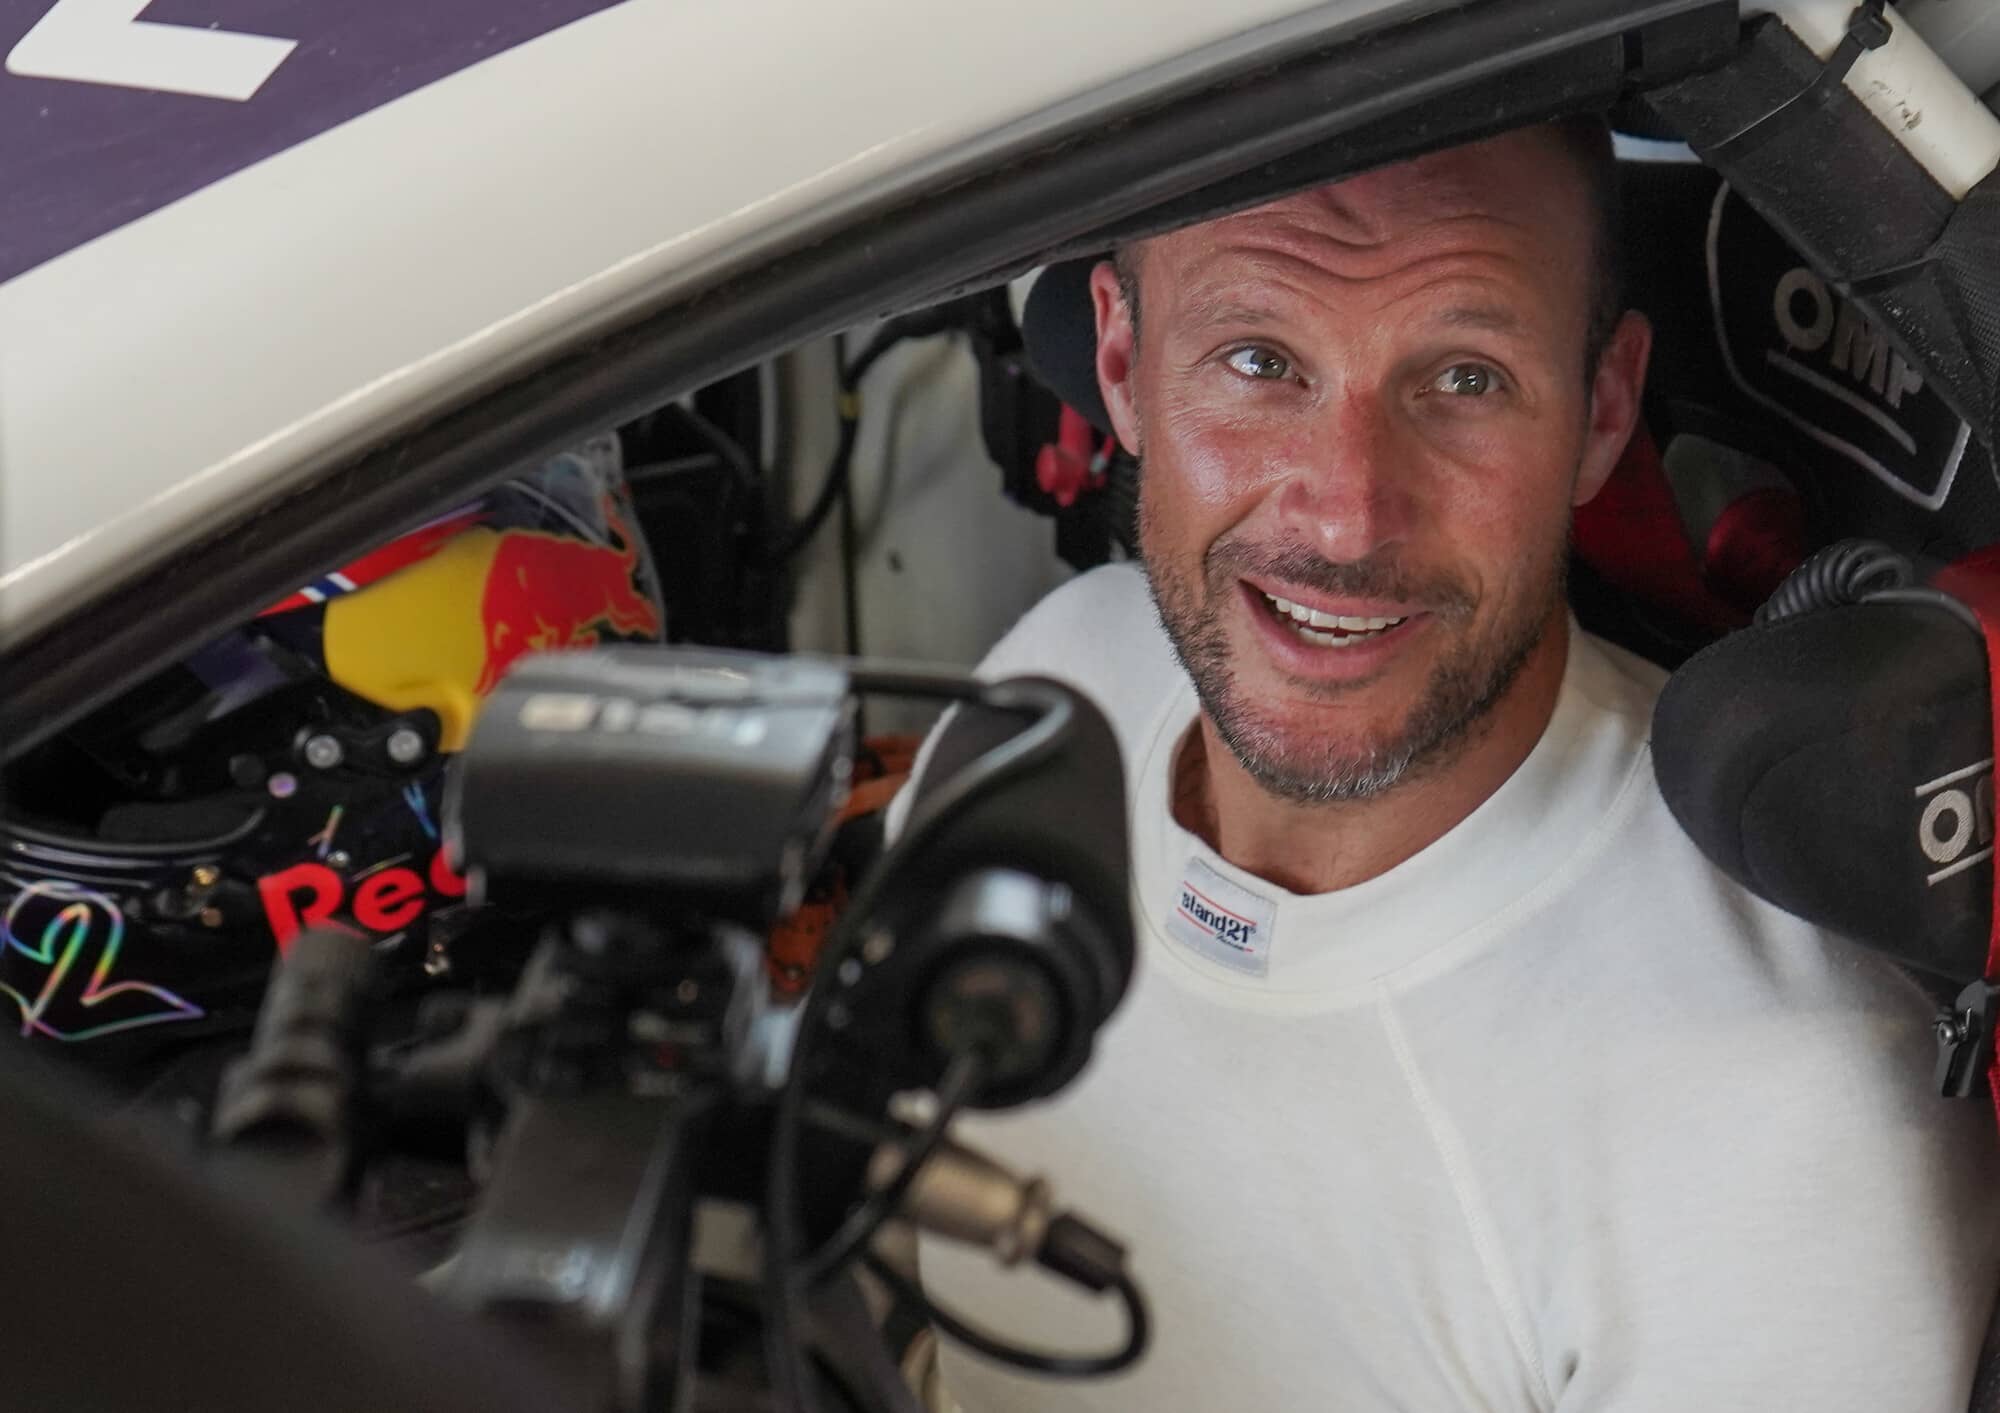 Ski legend aksel lund svindal to make rallycross debut at iconic hell stop